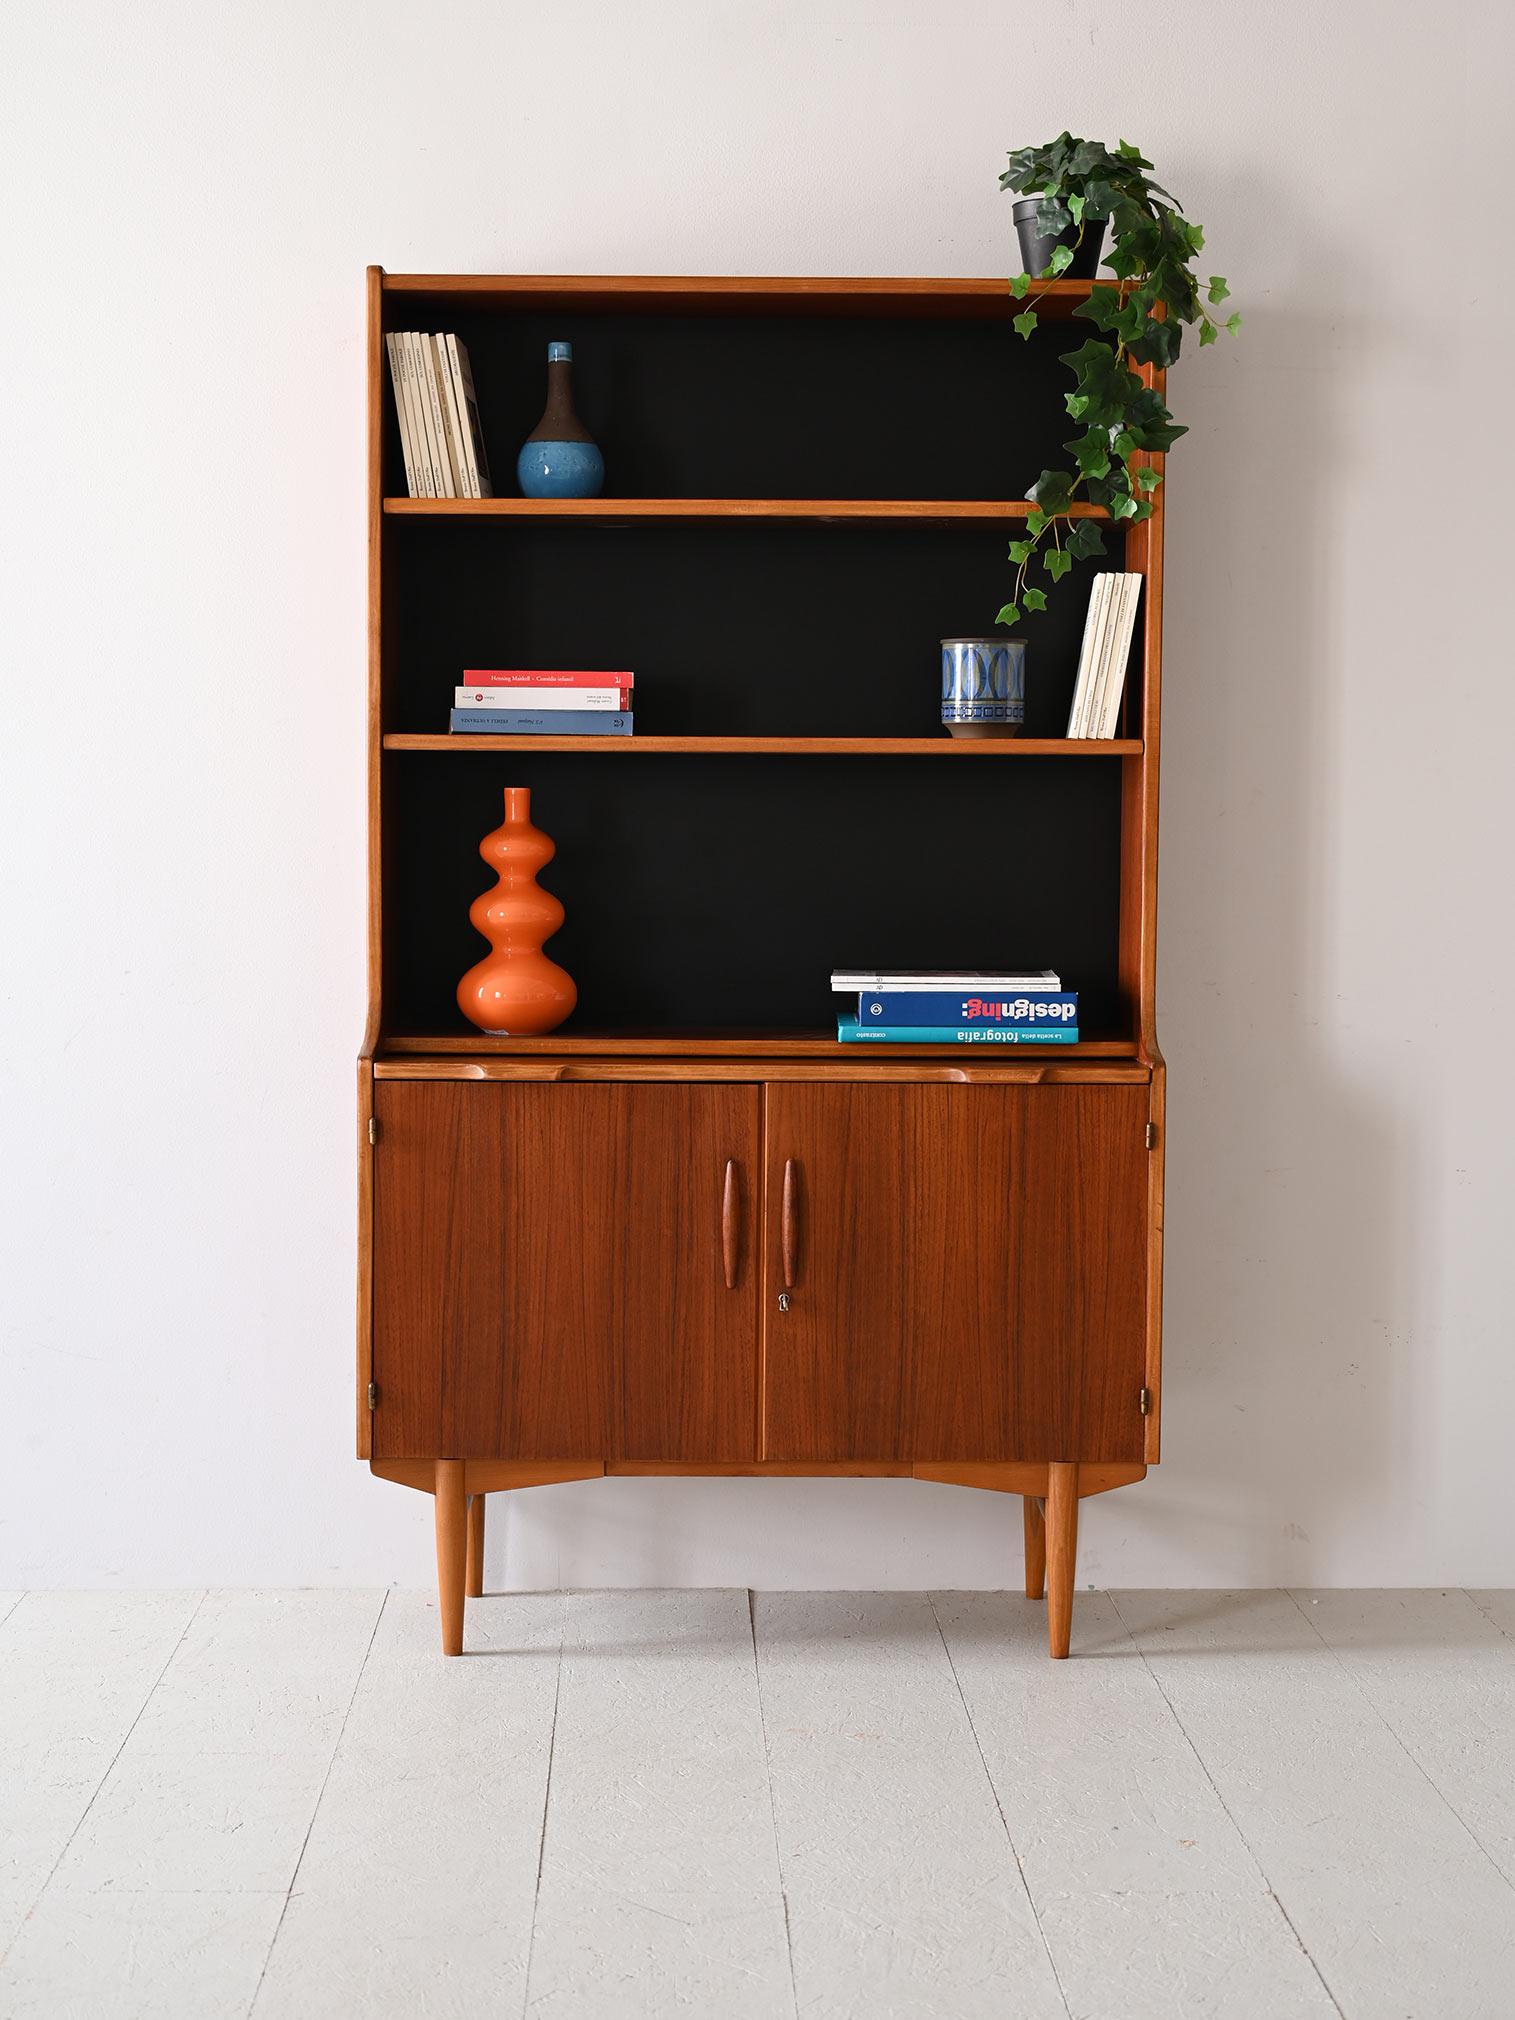 Teak cabinet with shelving and storage compartment.

This Scandinavian bookcase from the 1960s, thanks to its pull-out shelf and storage compartment closed by hinged doors, offers functionality and style in a compact space. 
The open shelves lend